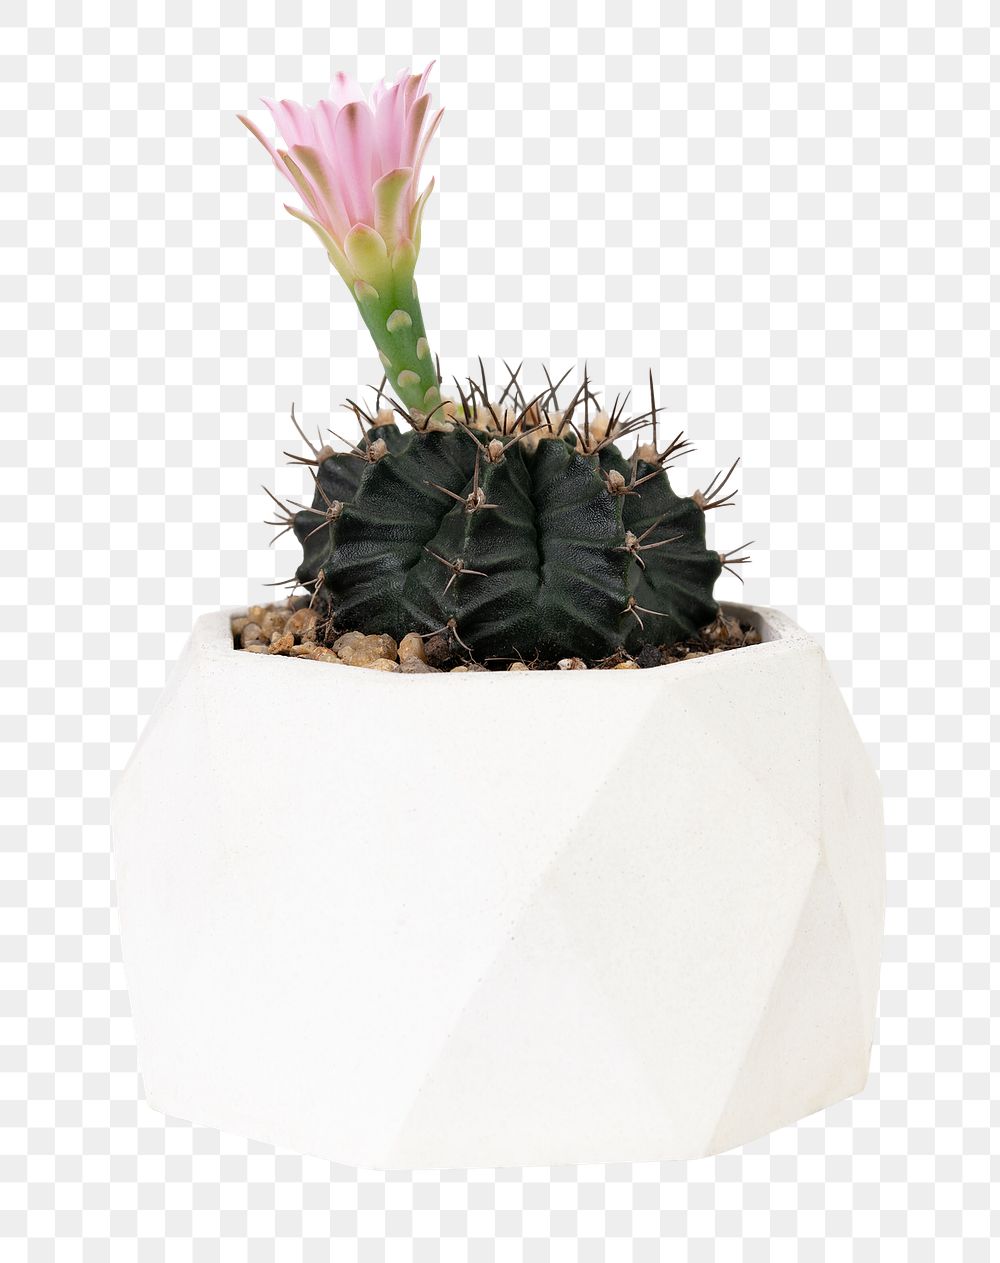 Echinopsis cactus plant png mockup with pink flower